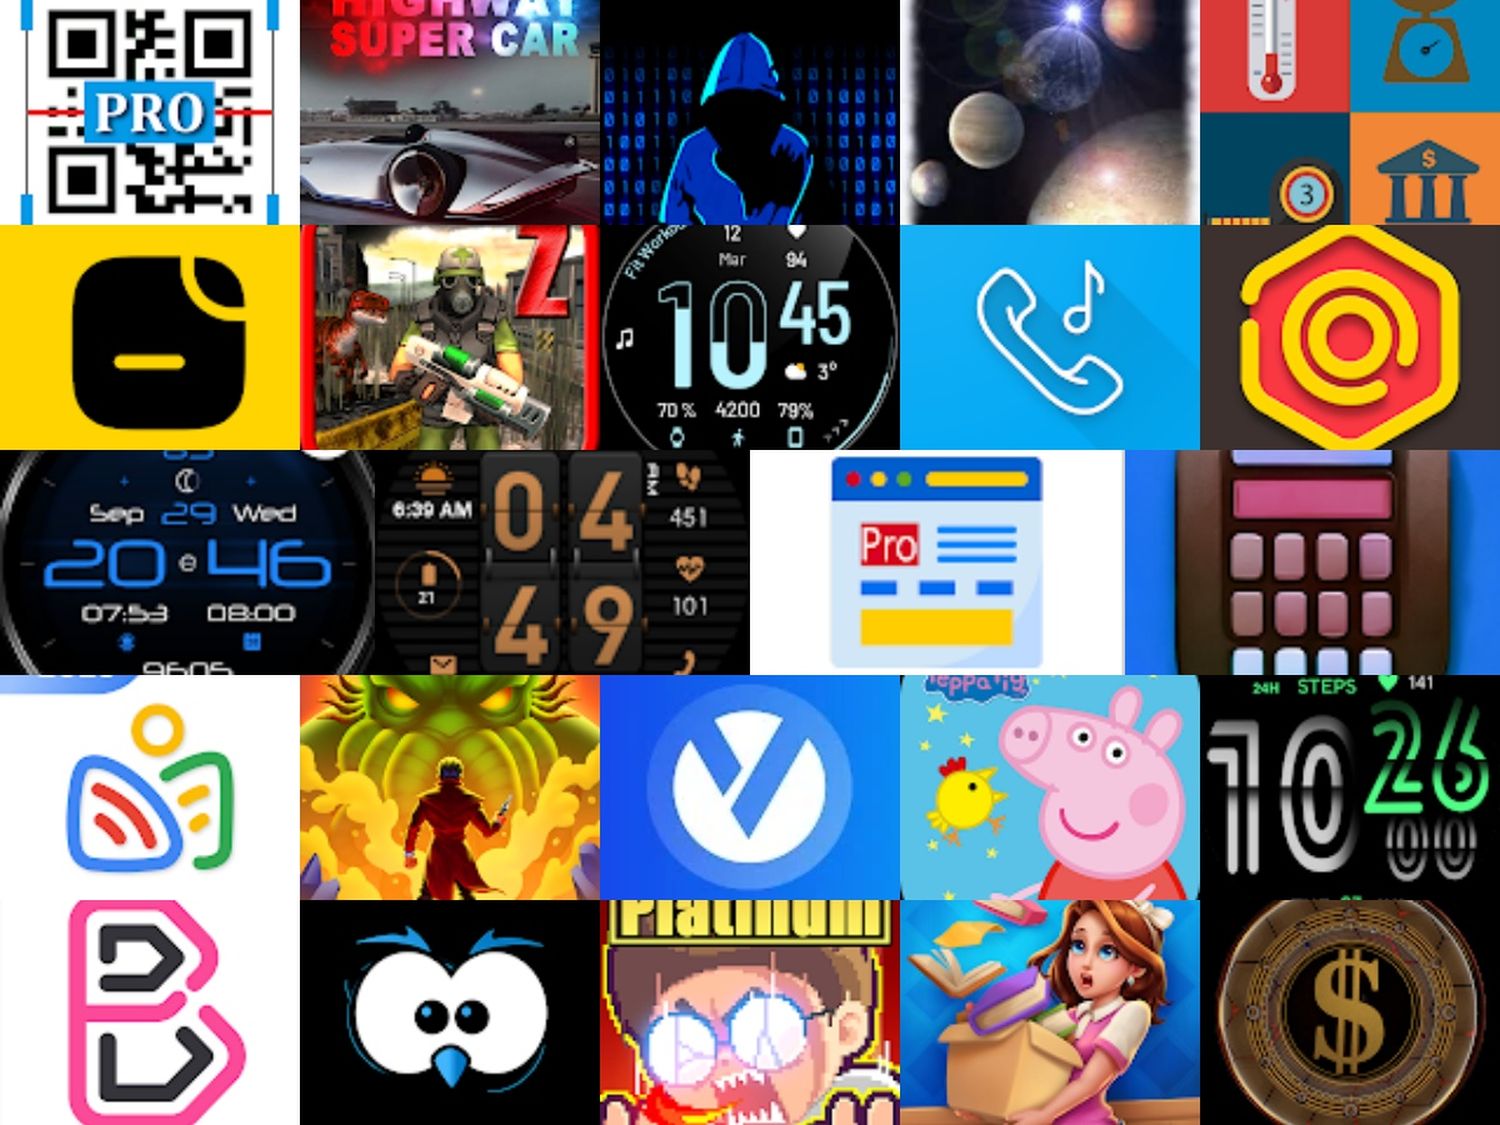 Google-Play-Store-Aktion-Diese-48-Android-Apps-Spiele-Icon-Packs-Live-Wallpaper-gibt-es-heute-Gratis